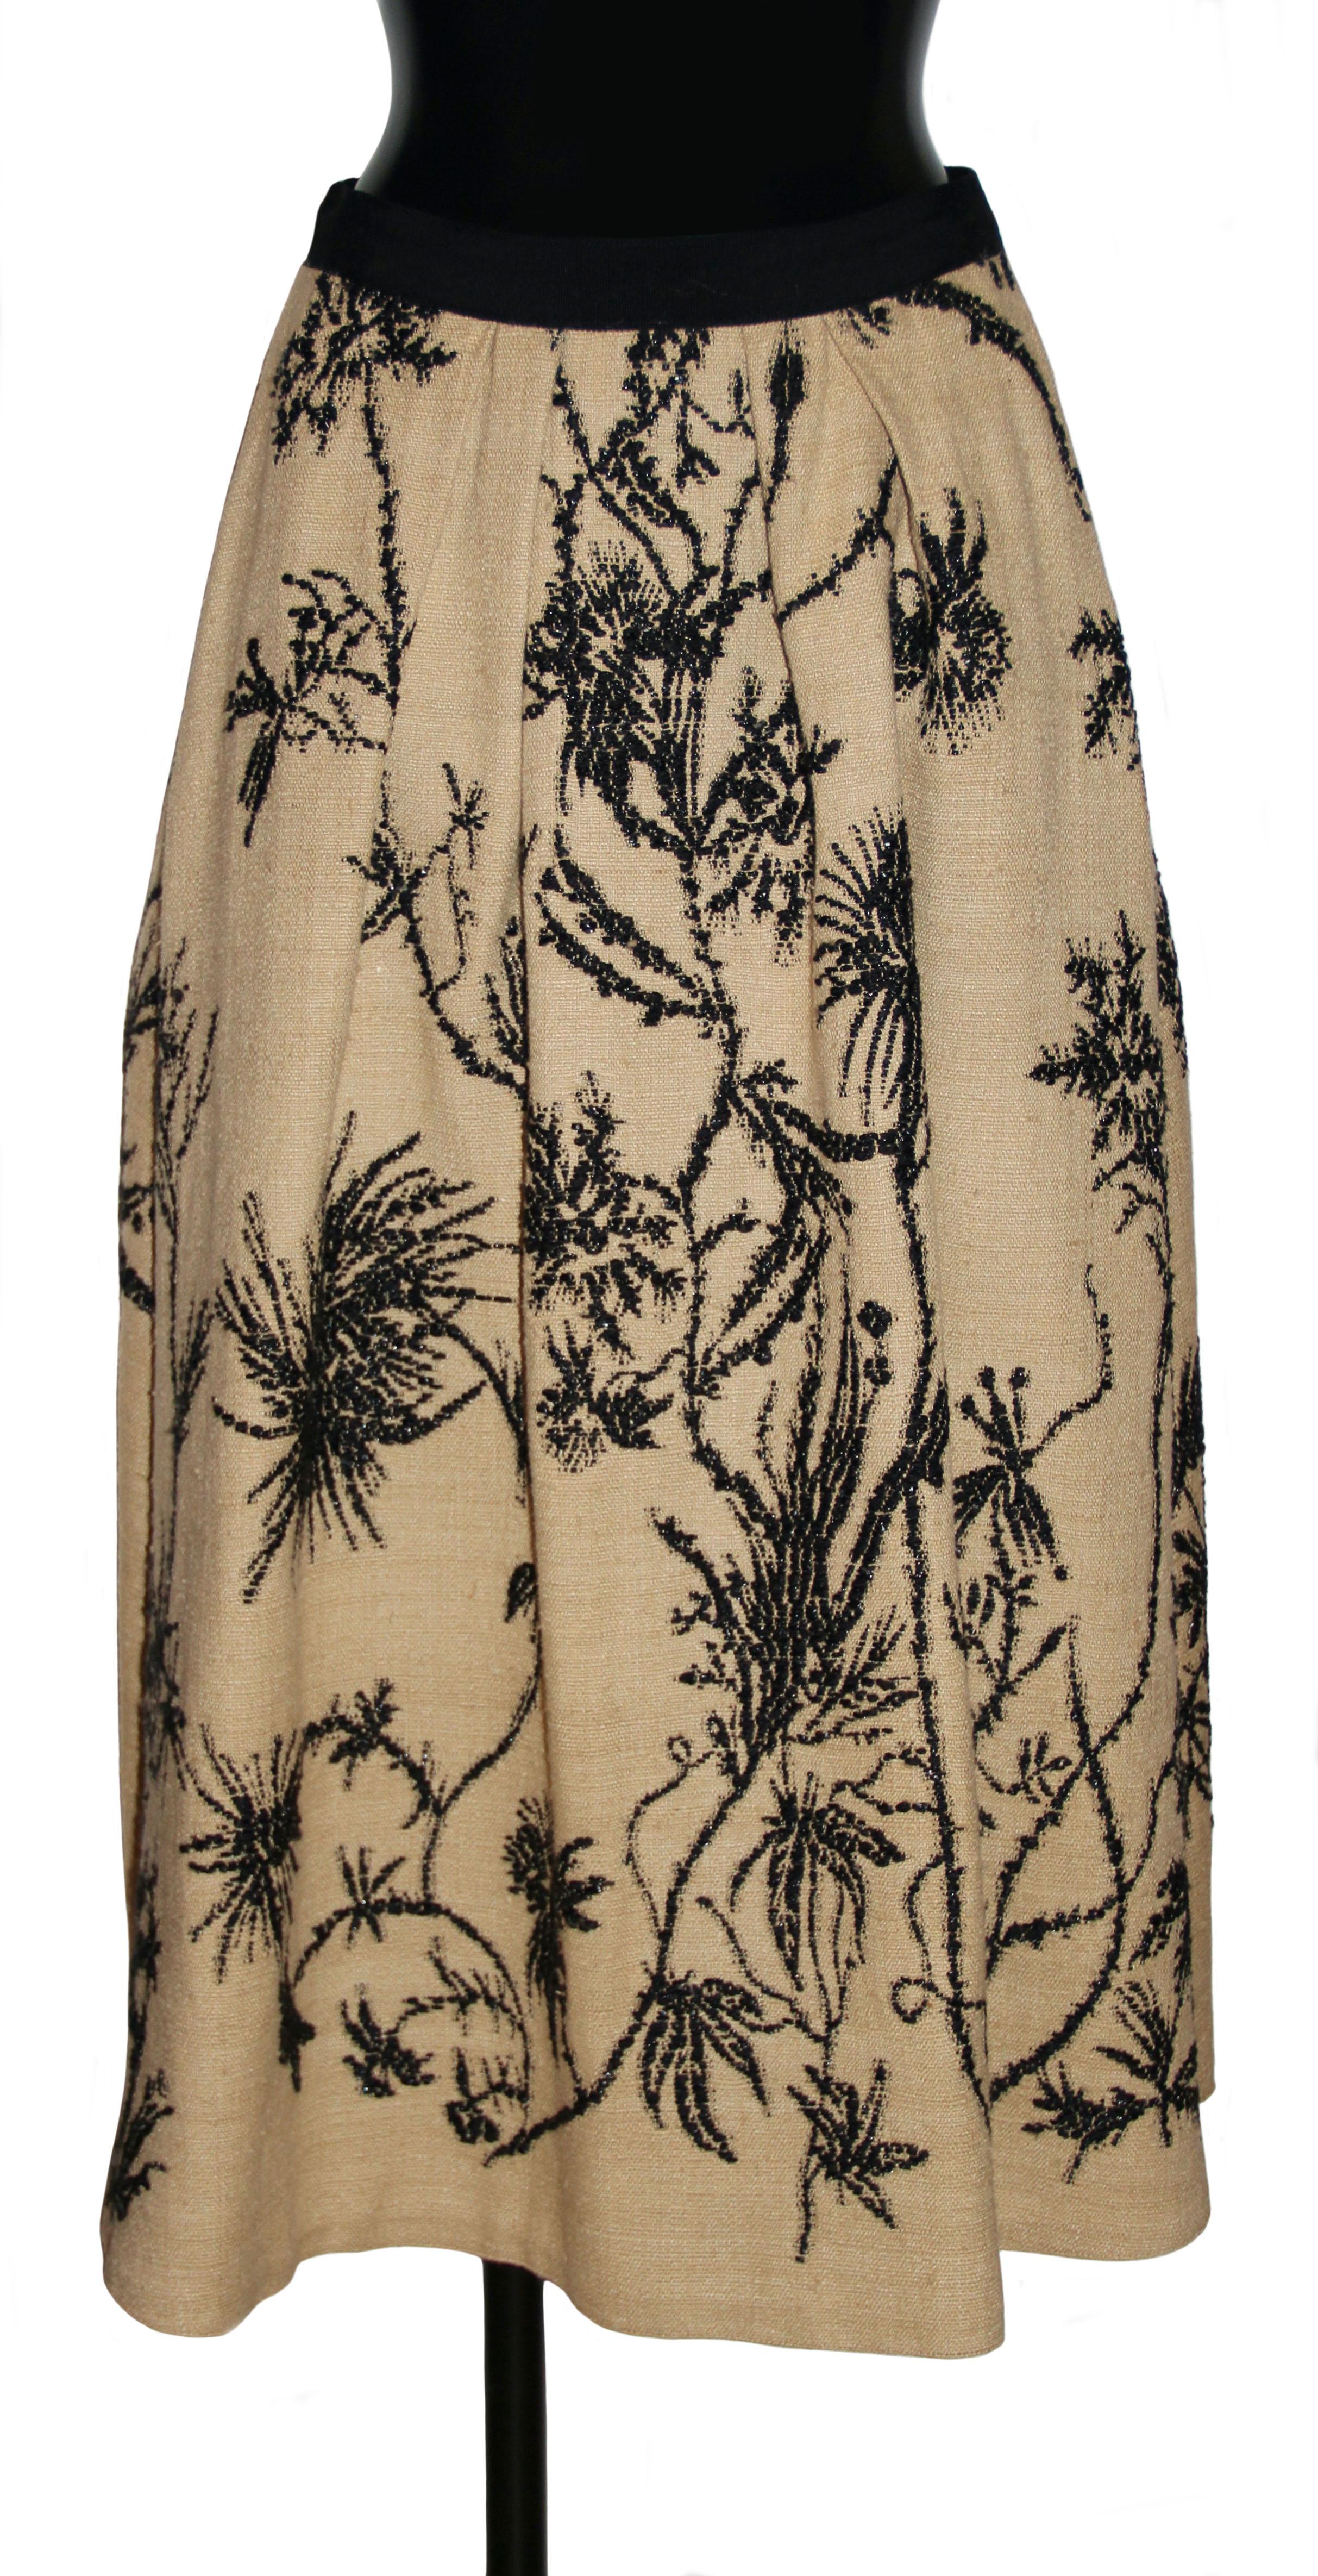 Brown Christian Dior SS 2020 Flower Natural Dior Tussah Silk Skirt with Raphia